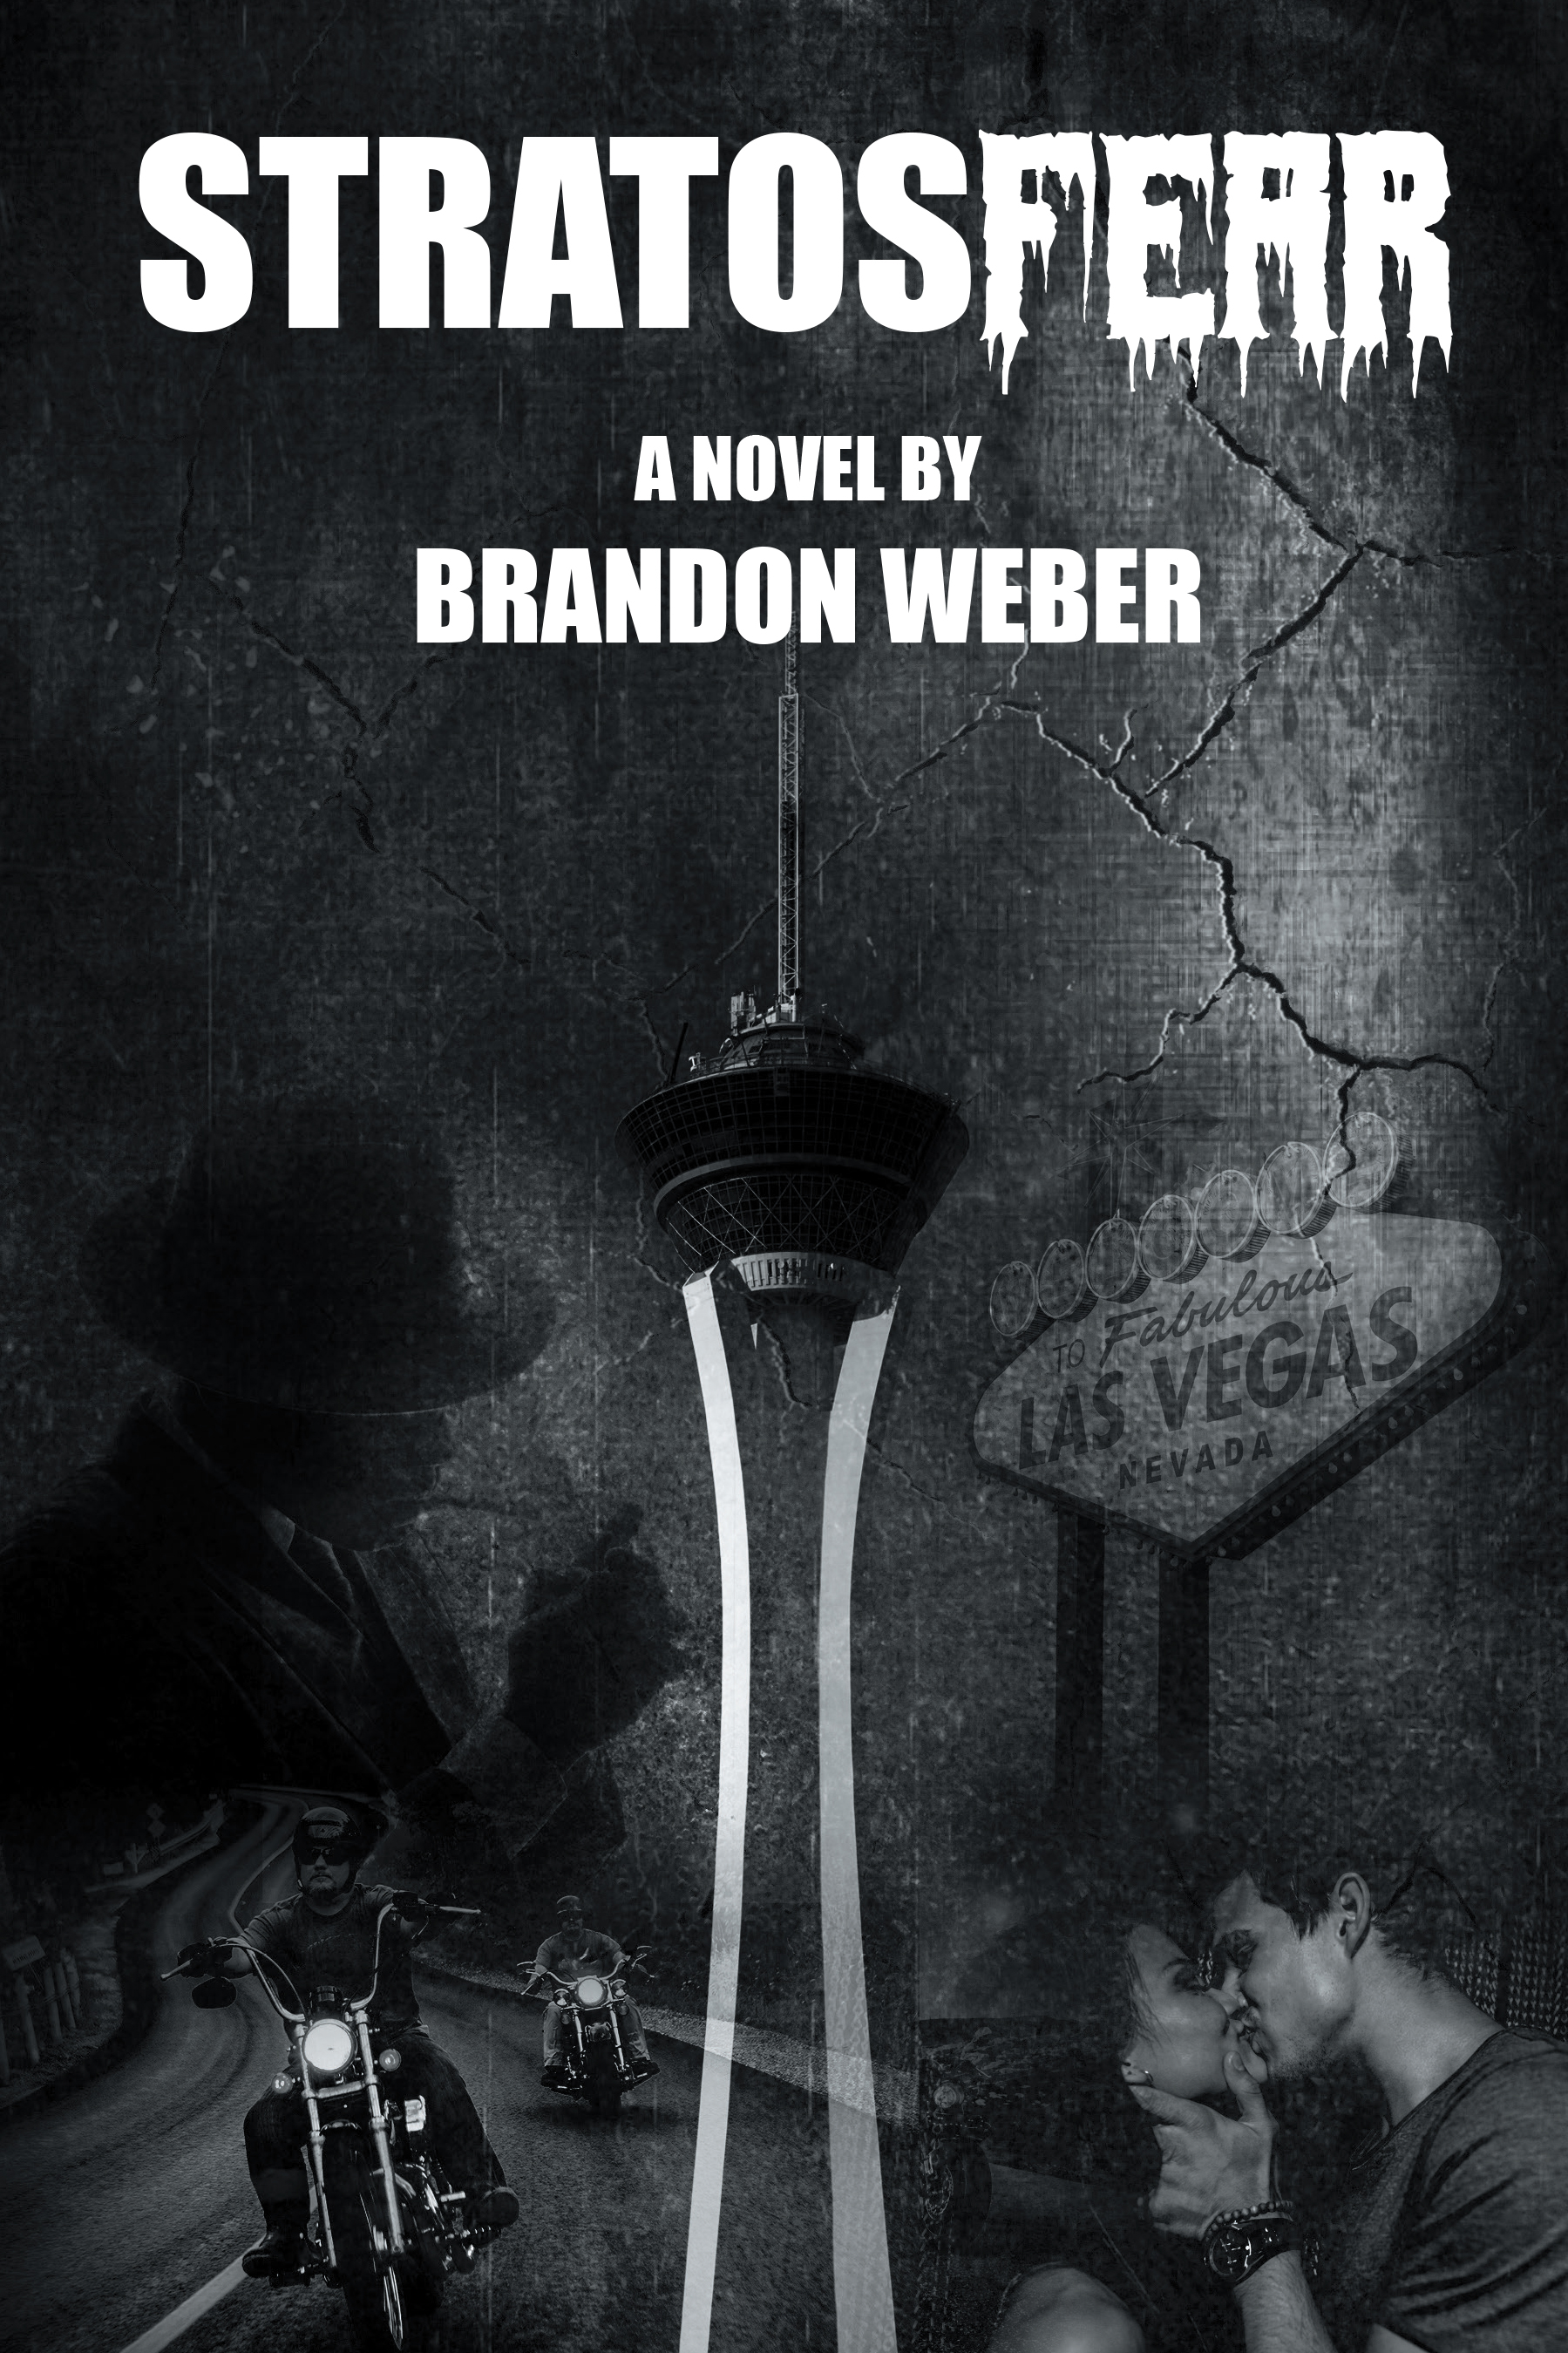 Author Brandon Weber’s New Book, "Stratosfear," is a Thrilling Mix of Fact and Fiction That Takes Readers on an Unforgettable Ride